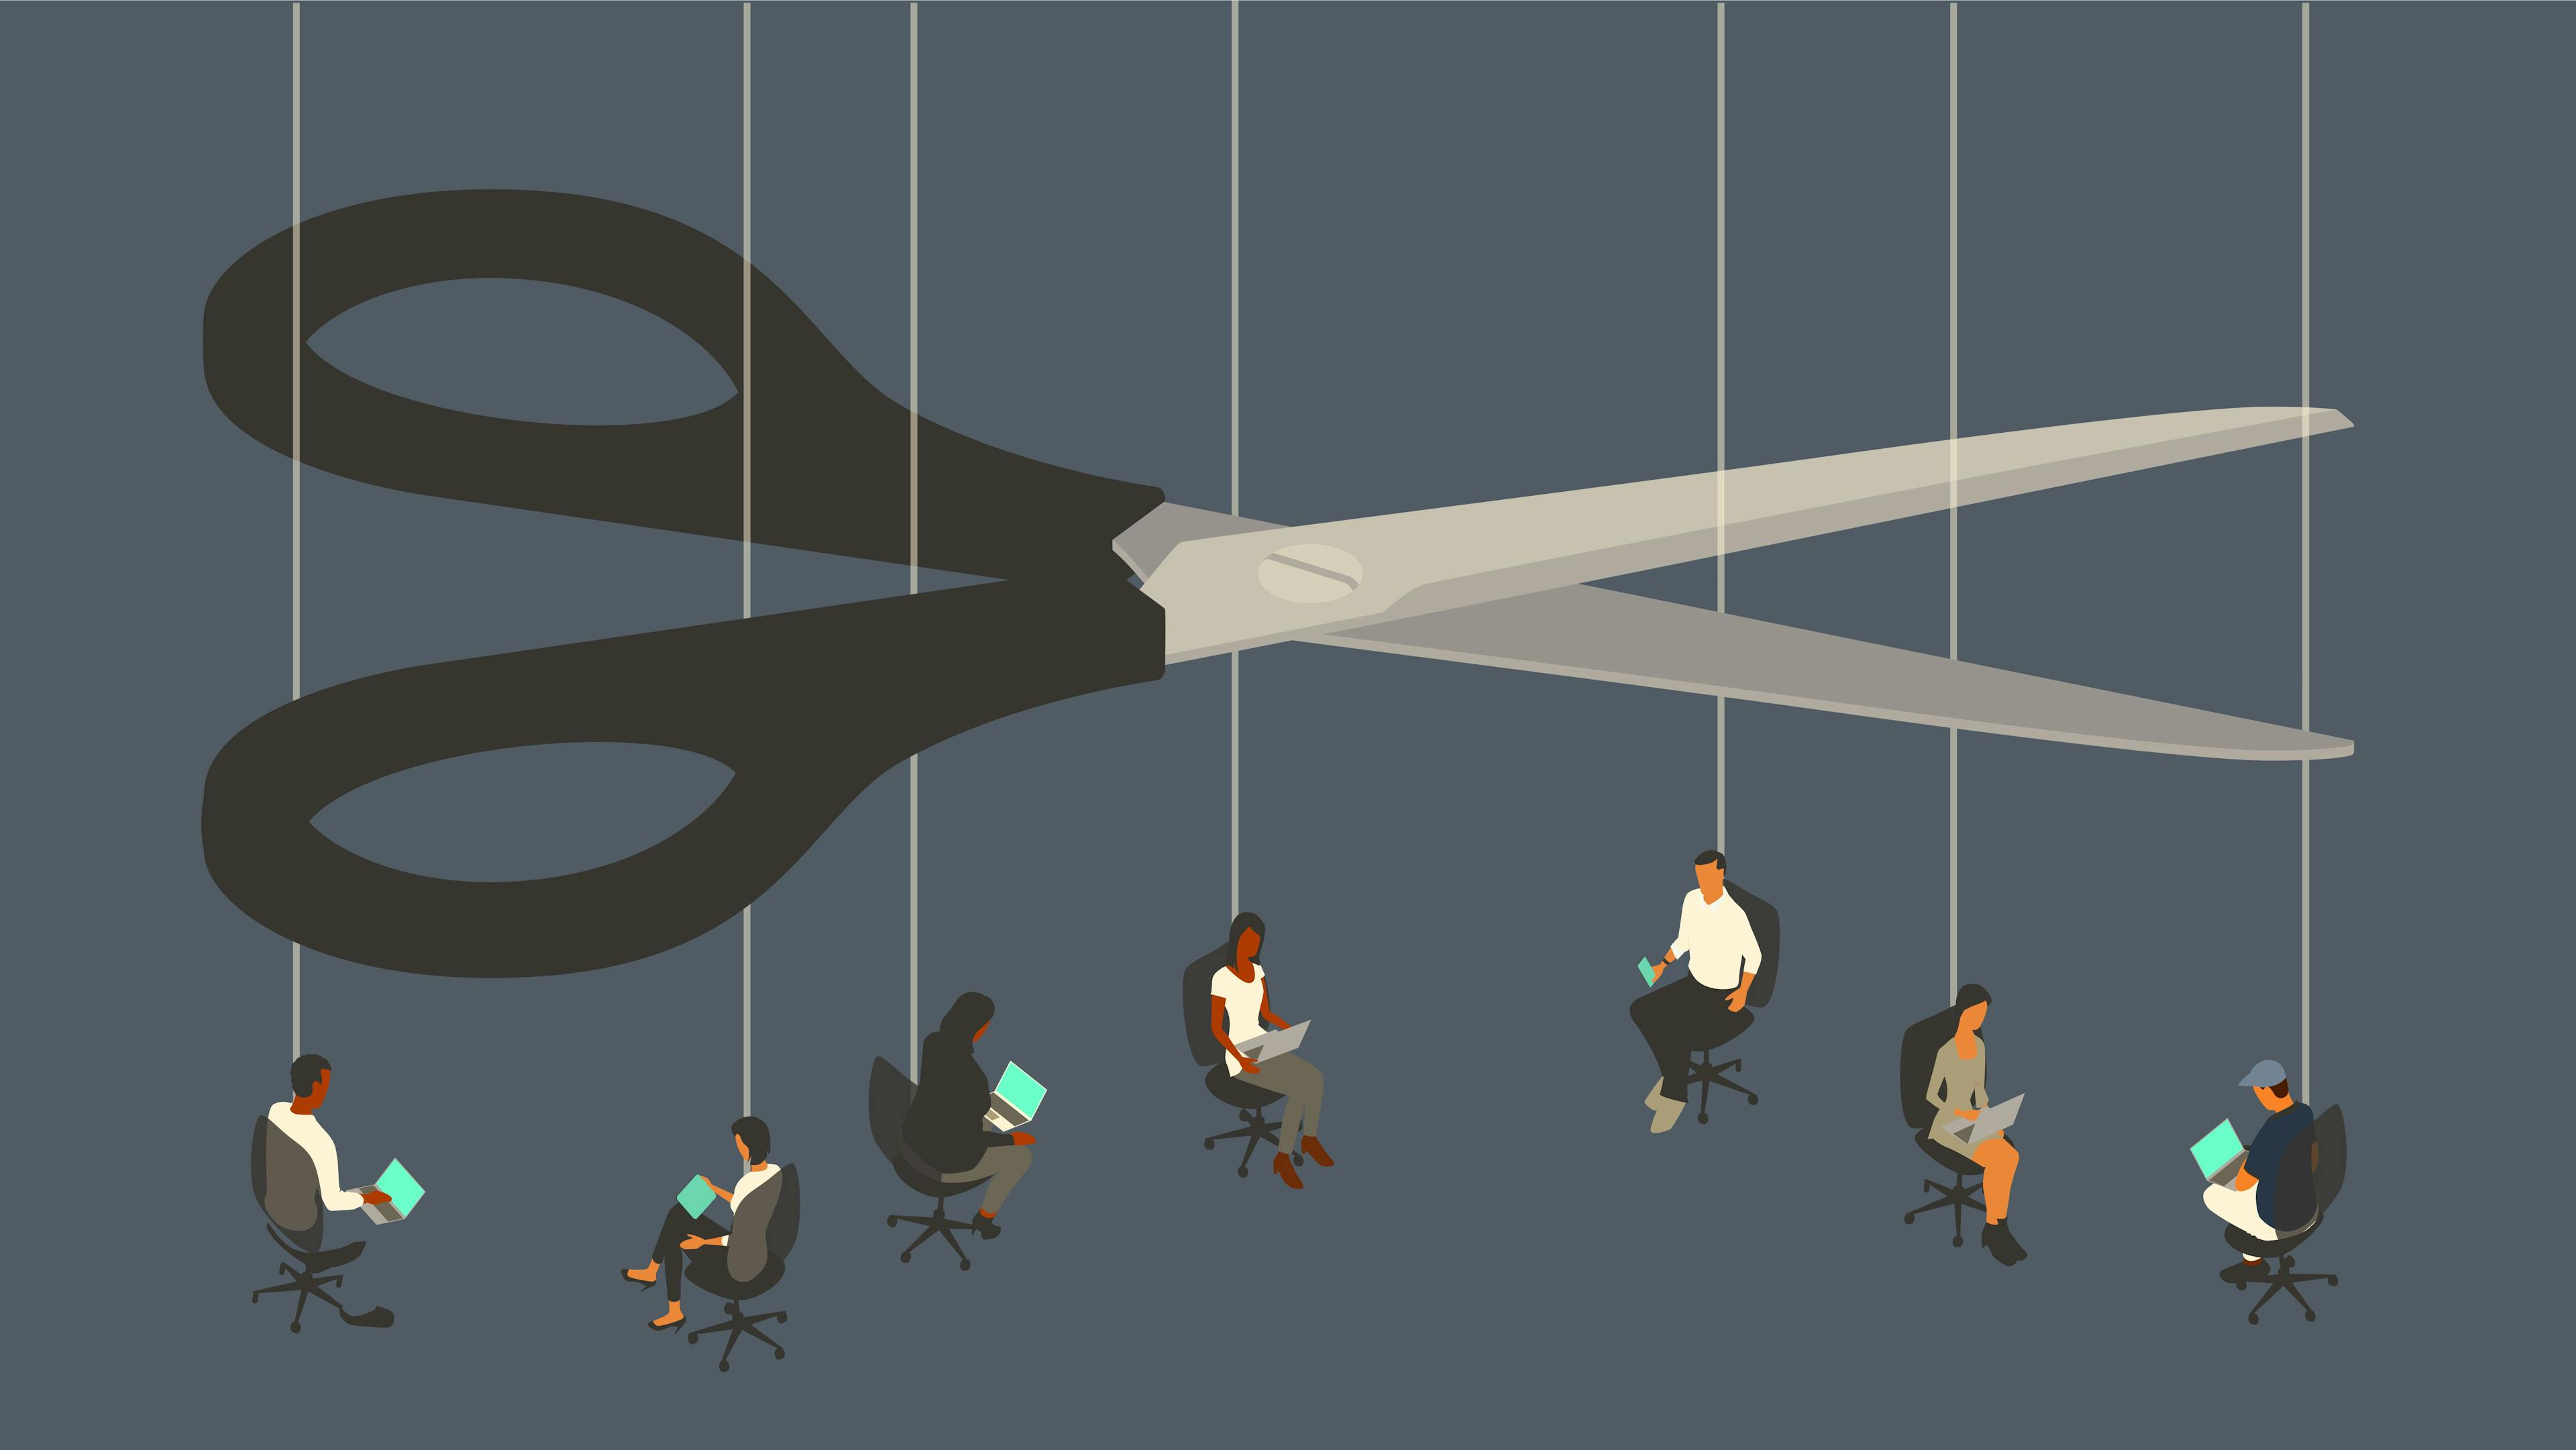 An oversized pair of scissors, that looms over seven workers sitting in office chairs suspended by strings.